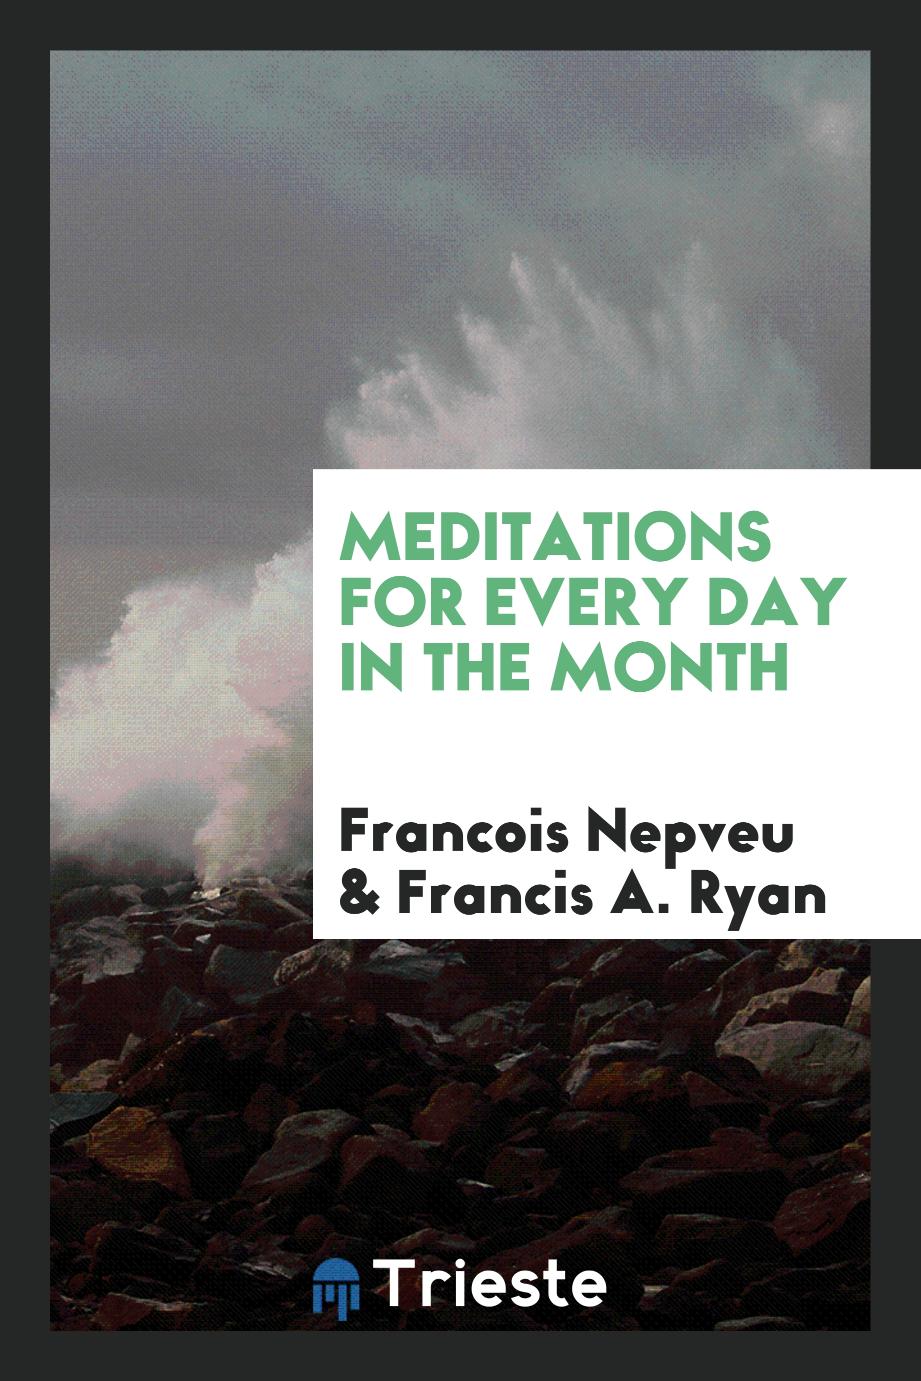 Meditations for every day in the month